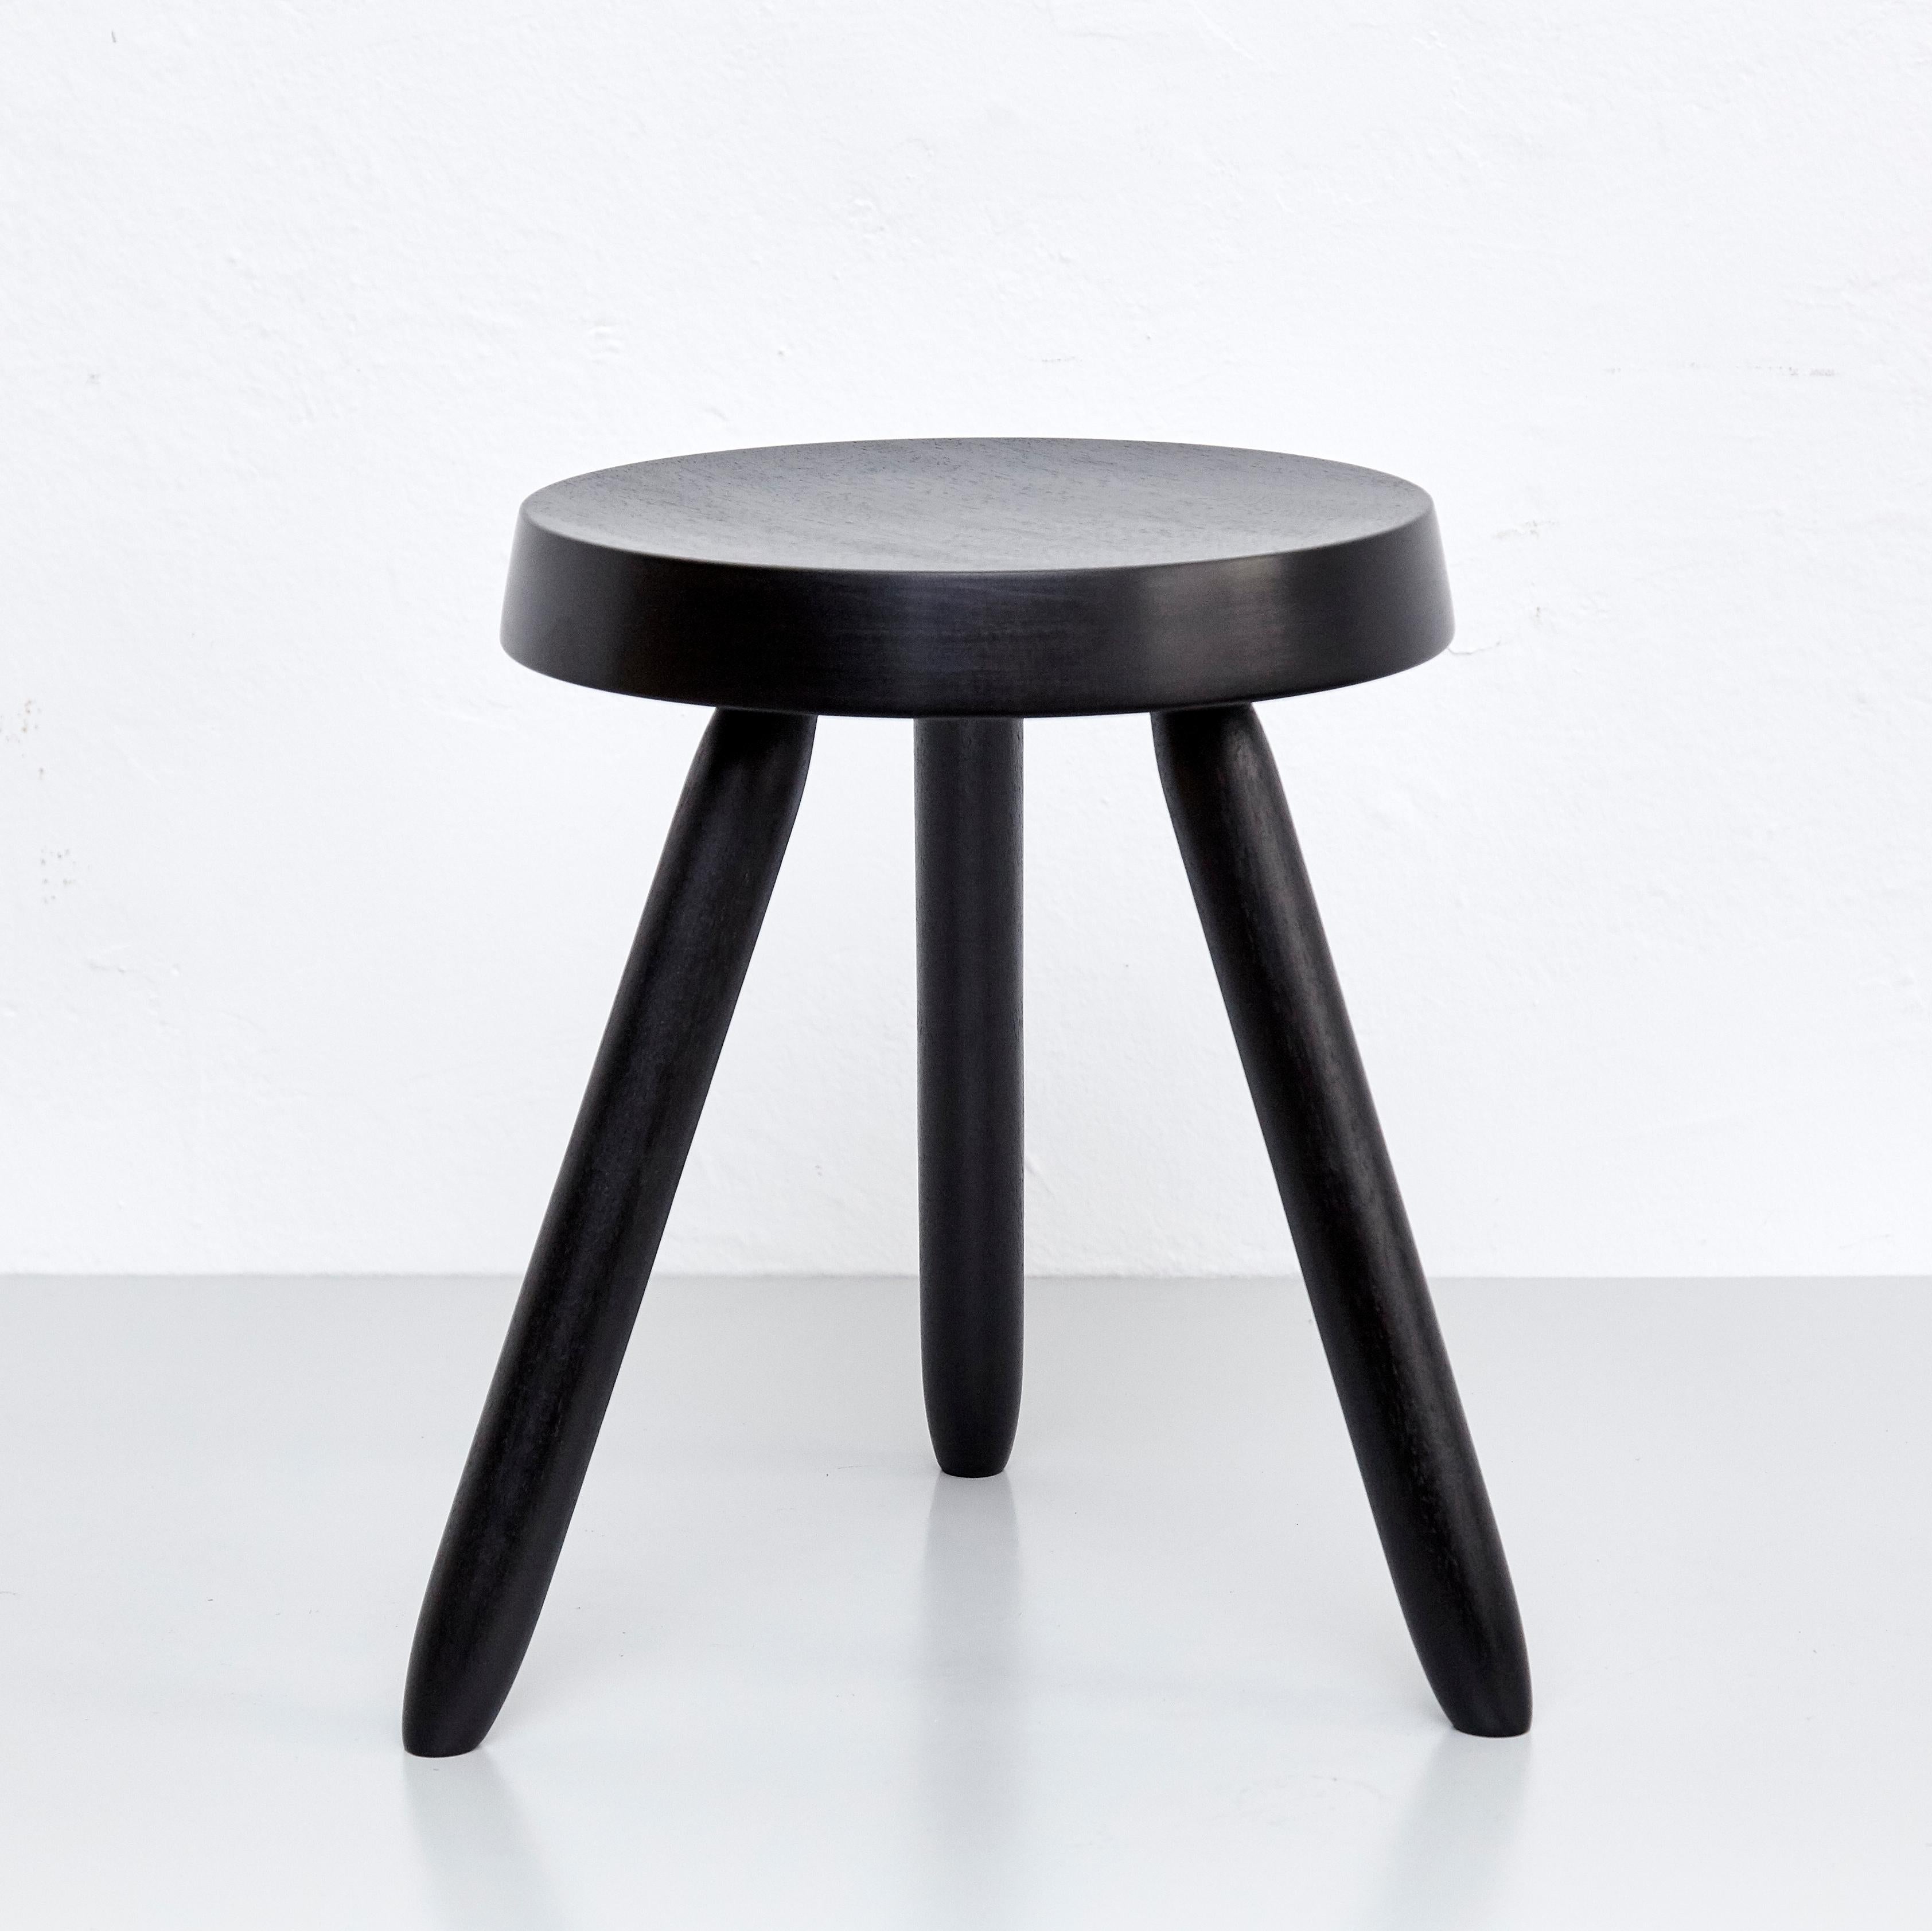 Stool designed in the style of Charlotte Perriand.
Made by unknown manufacturer.

We offer free worldwide shipping for this piece.

In good original condition, preserving a beautiful patina, with minor wear consistent with age and use. 

Charlotte